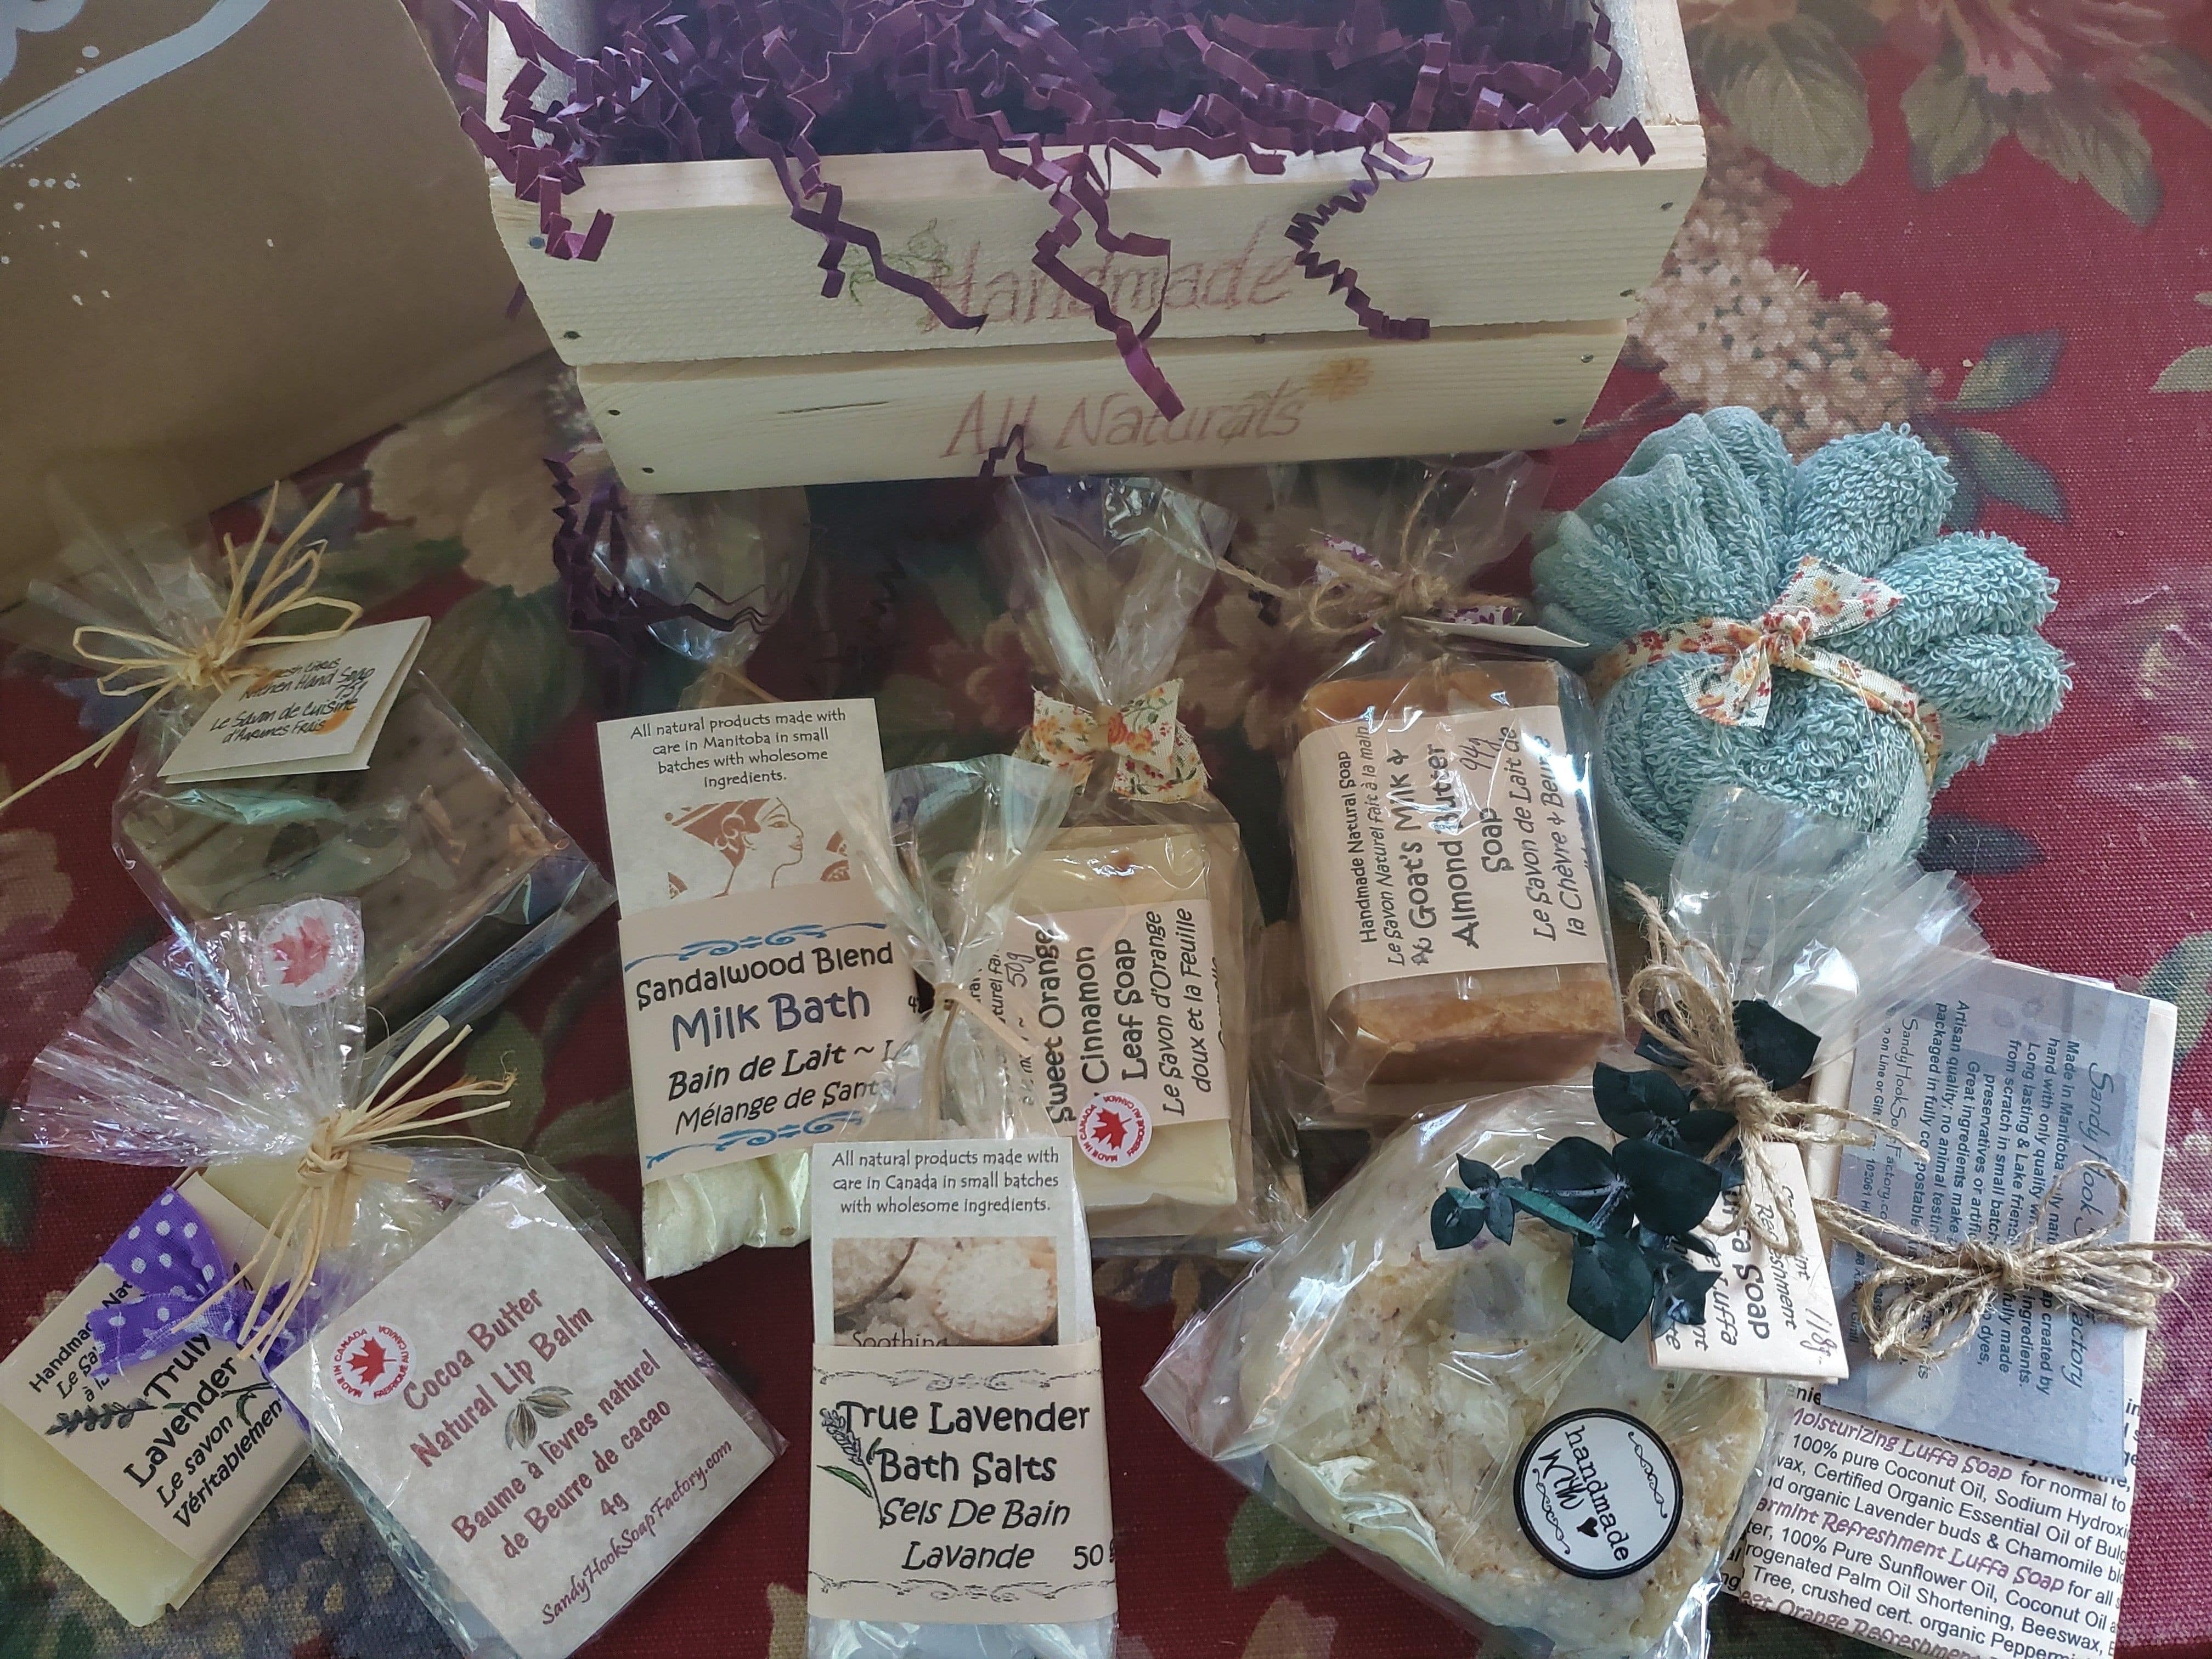 We make quality small batch soap gifts handmade in Gimli Manitoba. All natural soaps, bath salts, milk baths, natural lip balms and lovely distinctive gift sets